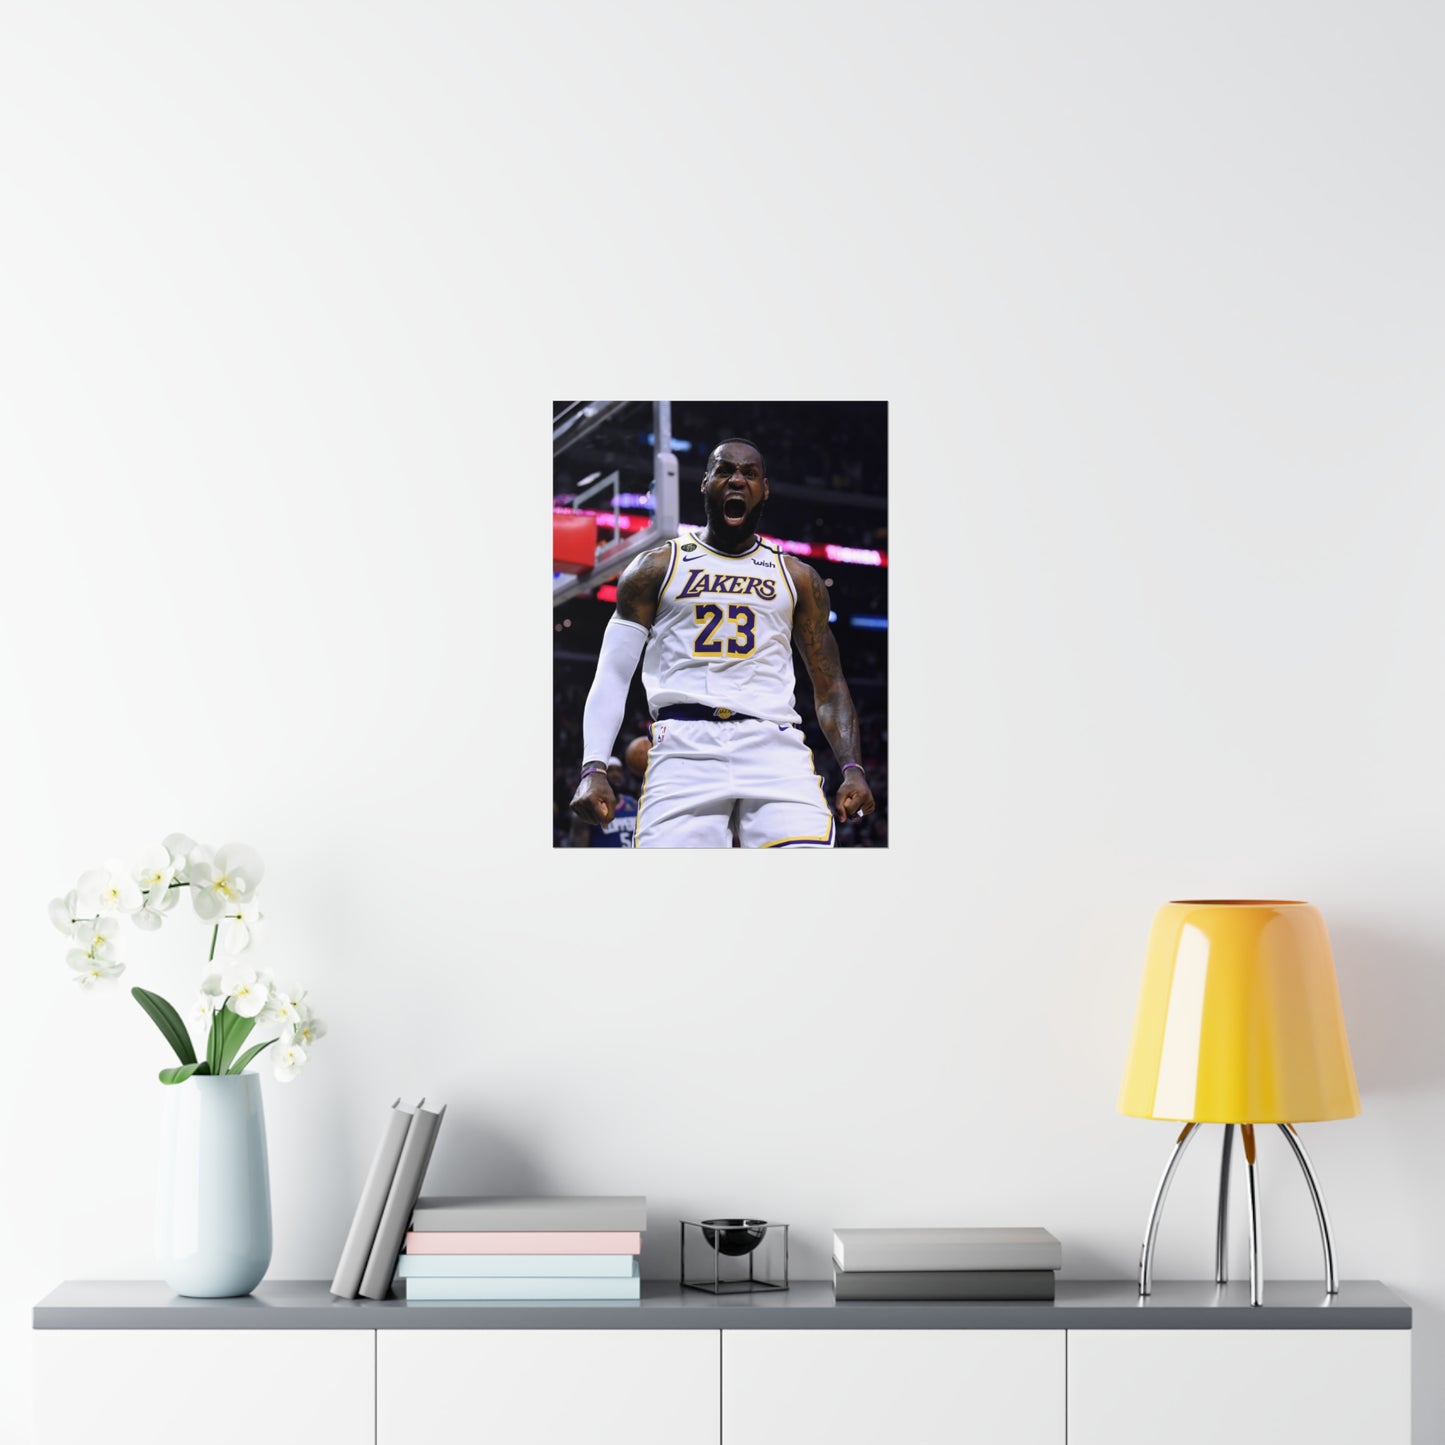 Lebron James Yelling In Celebration In White Los Angeles Lakers 23 Jersey Poster